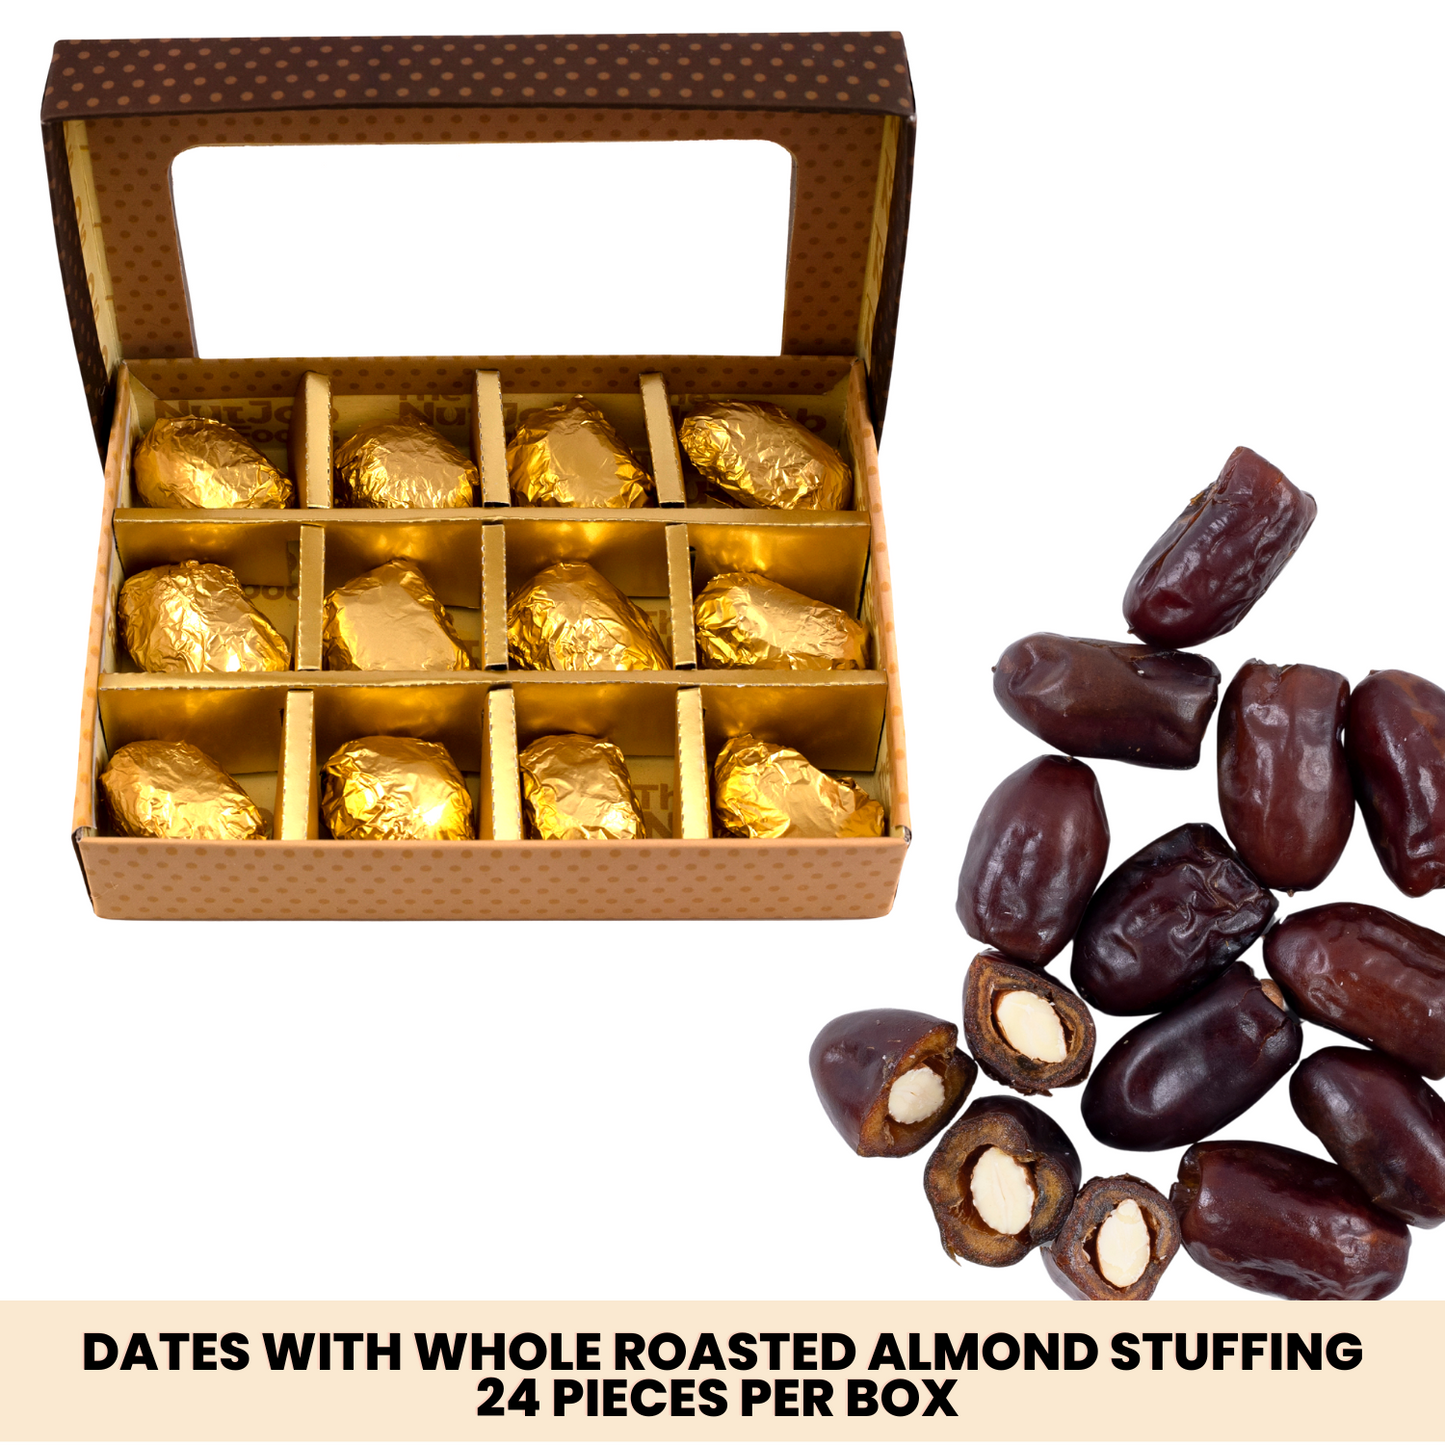 De-pitted Dates with Whole Roasted Almonds at their Centre - 24 Foil Wrapped Pieces